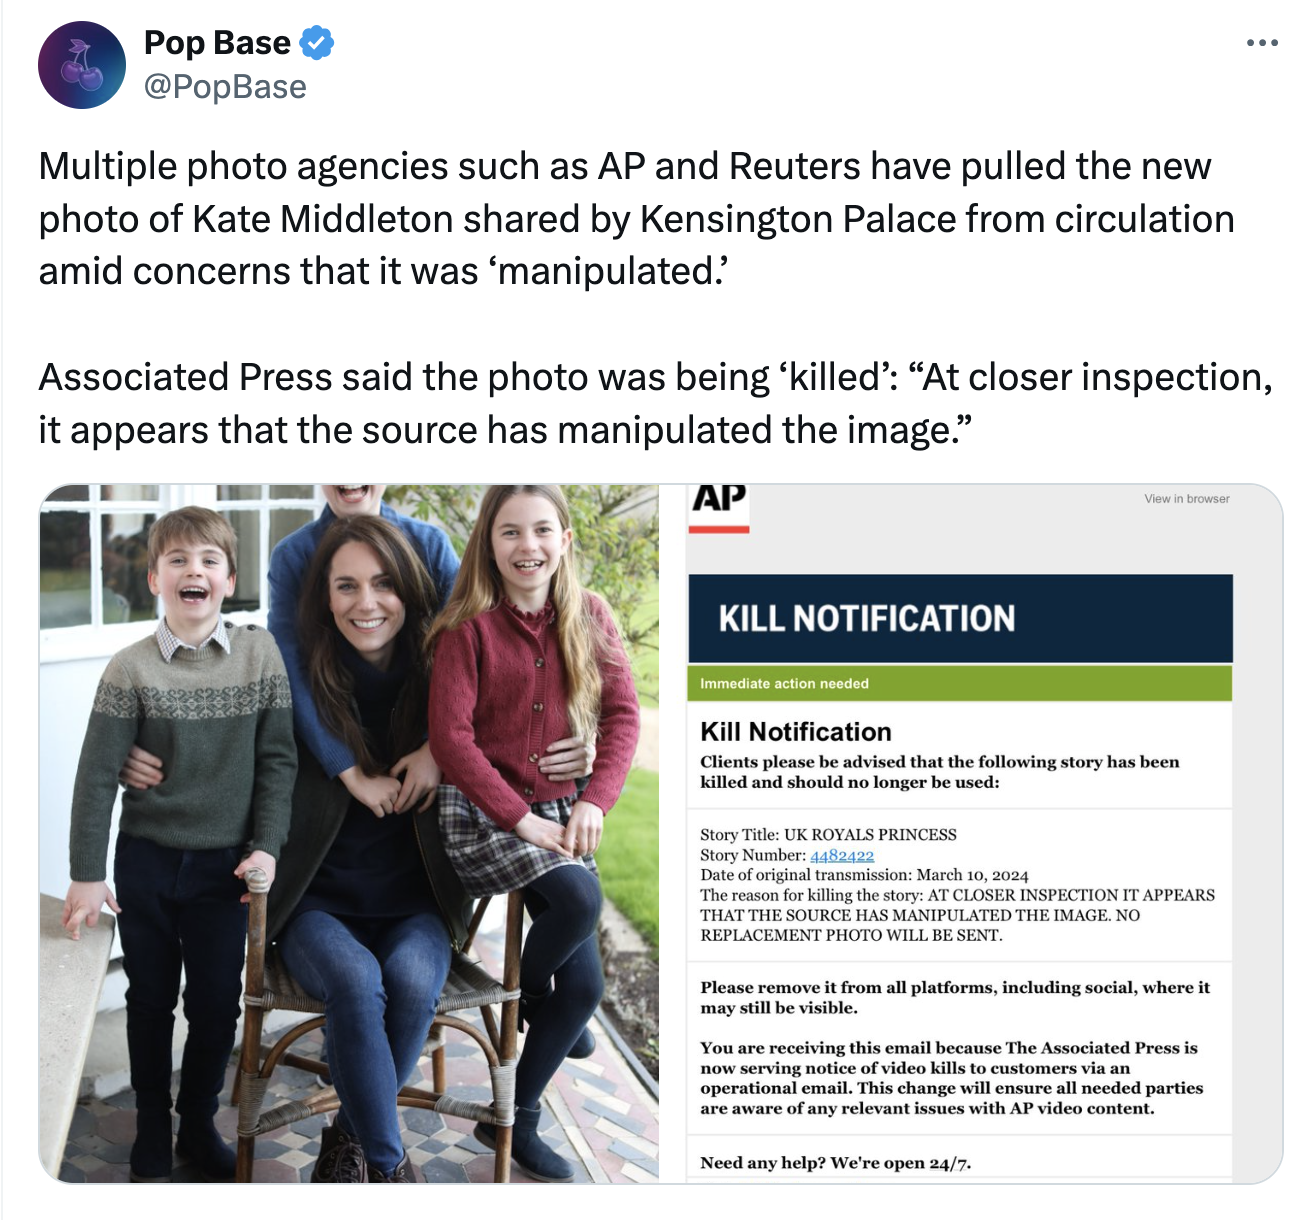 media - Pop Base Multiple photo agencies such as Ap and Reuters have pulled the new photo of Kate Middleton d by Kensington Palace from circulation amid concerns that it was 'manipulated.' Associated Press said the photo was being 'killed' "At closer insp